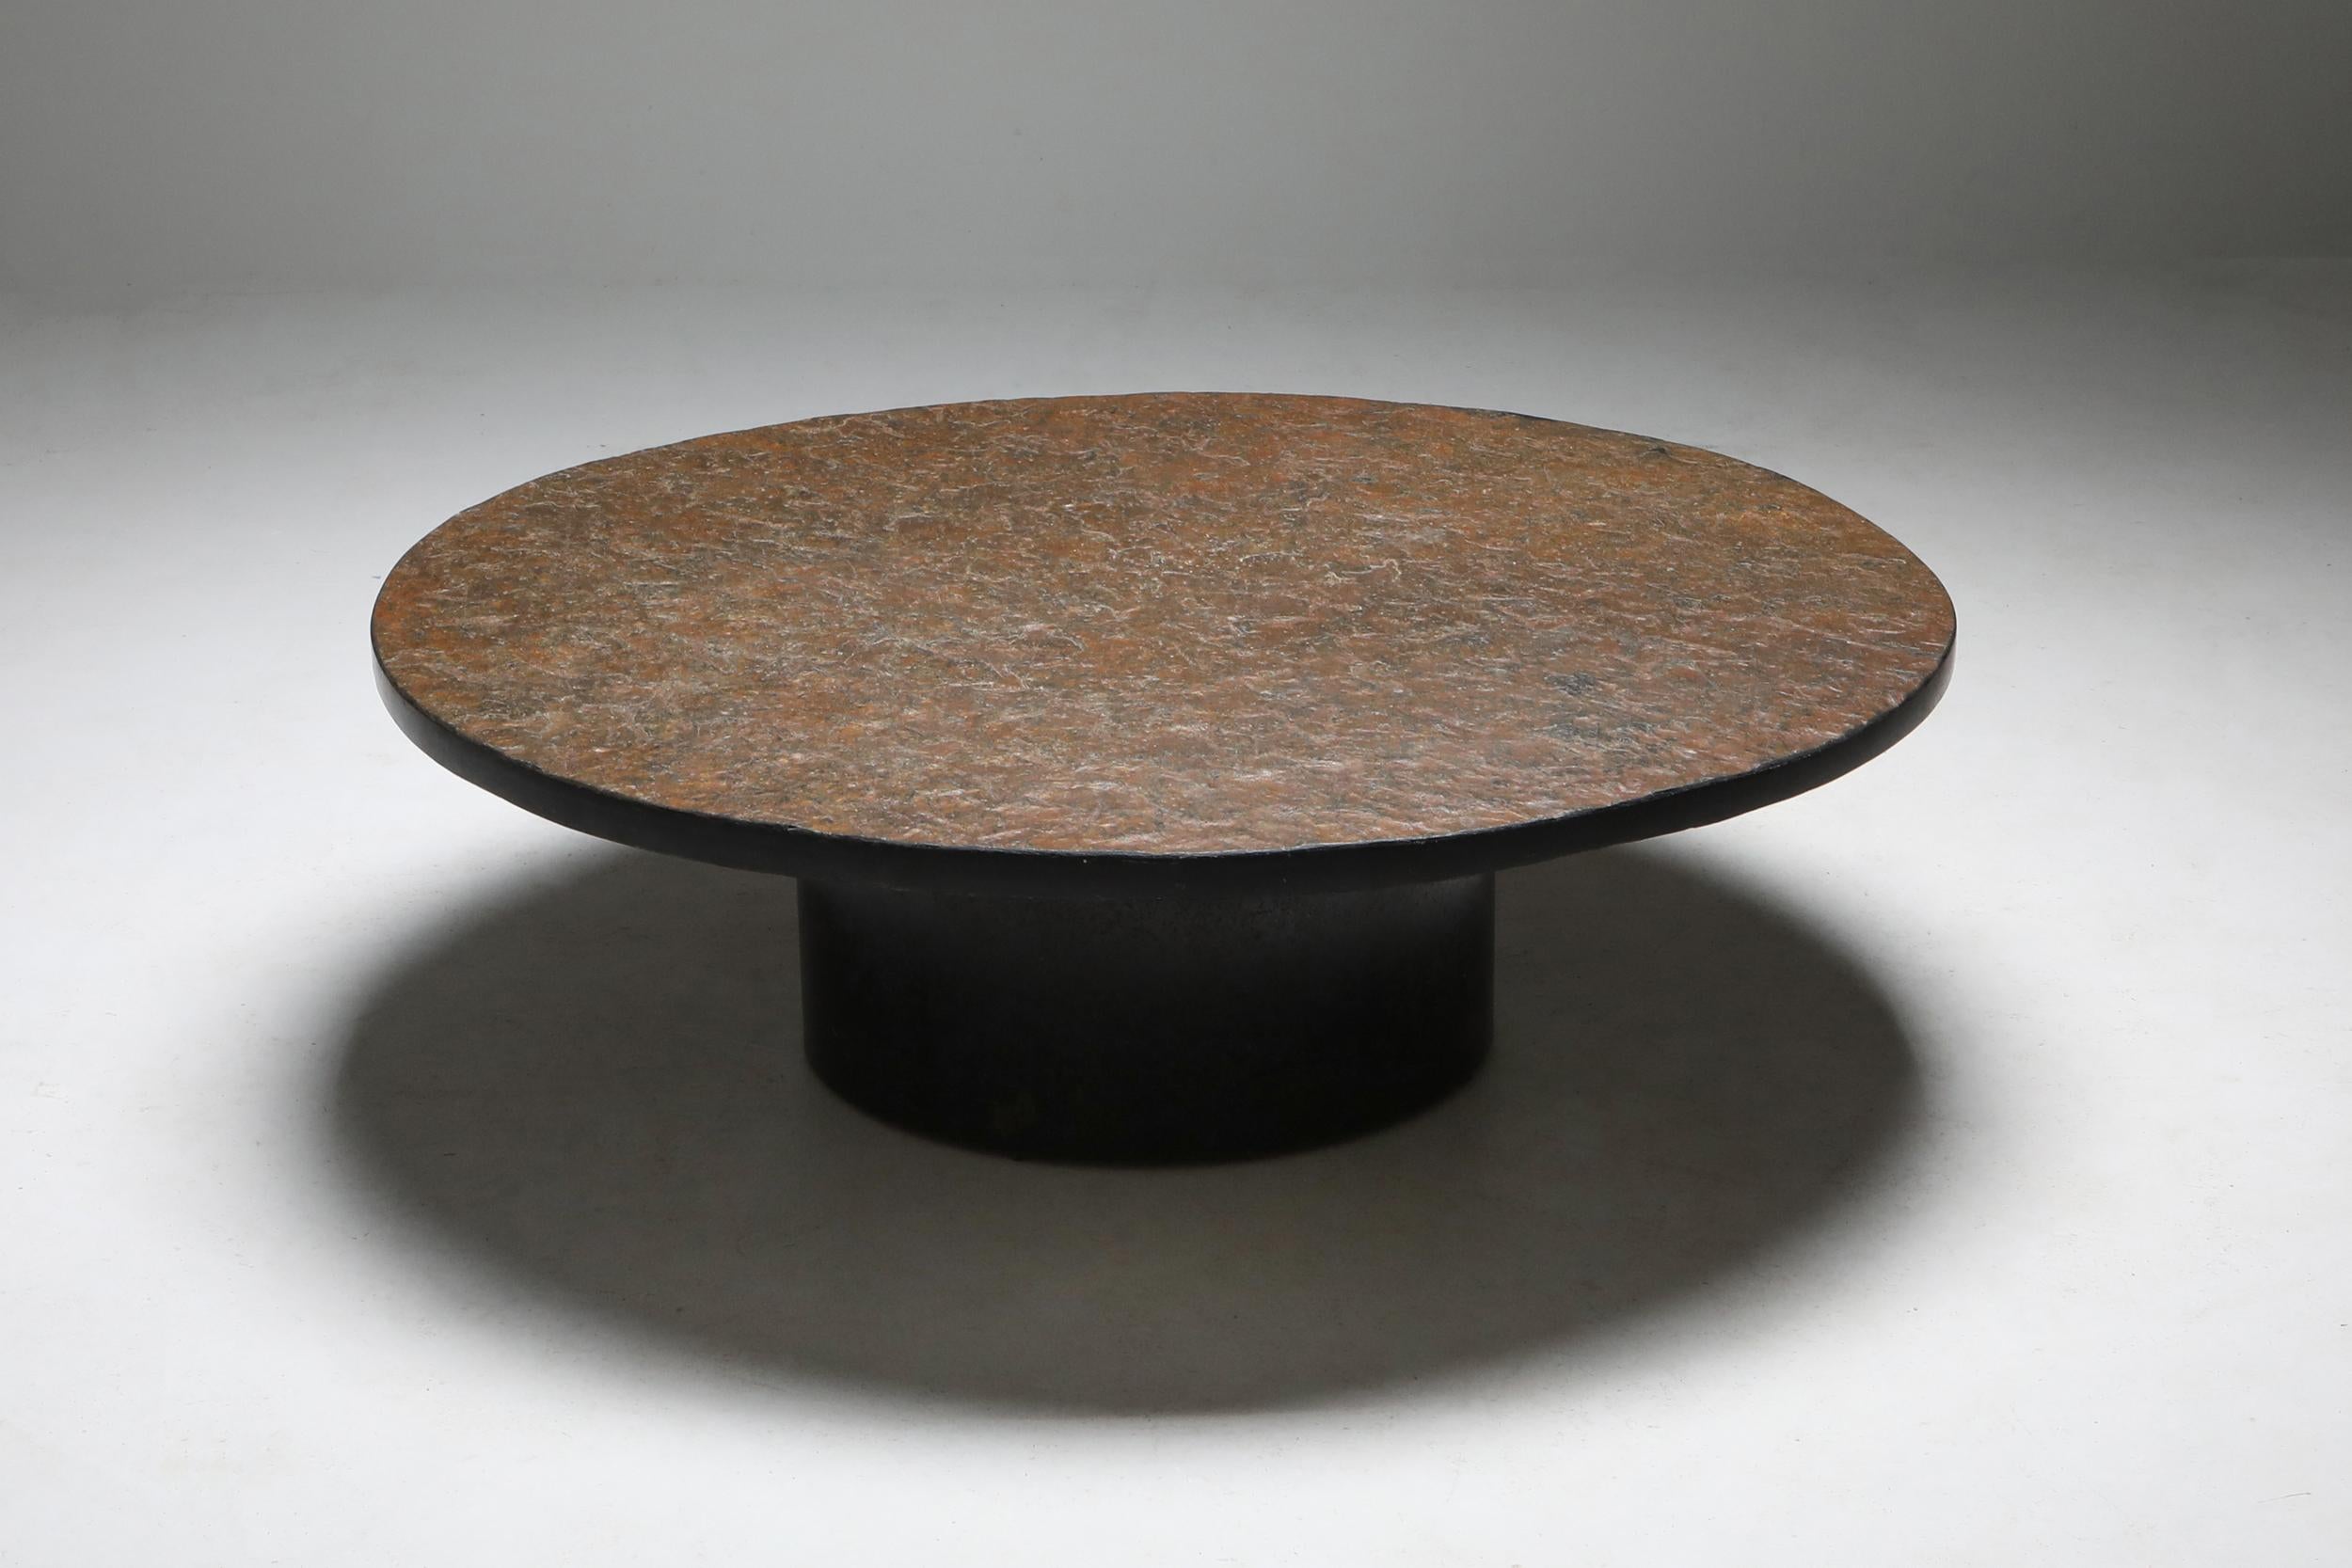 Rustic modern, Wabi sabi slate stone coffee table
Would fit well in a decor inspired by Axel Vervoordt or a more evocative interior by Kelly Wearstler.

           